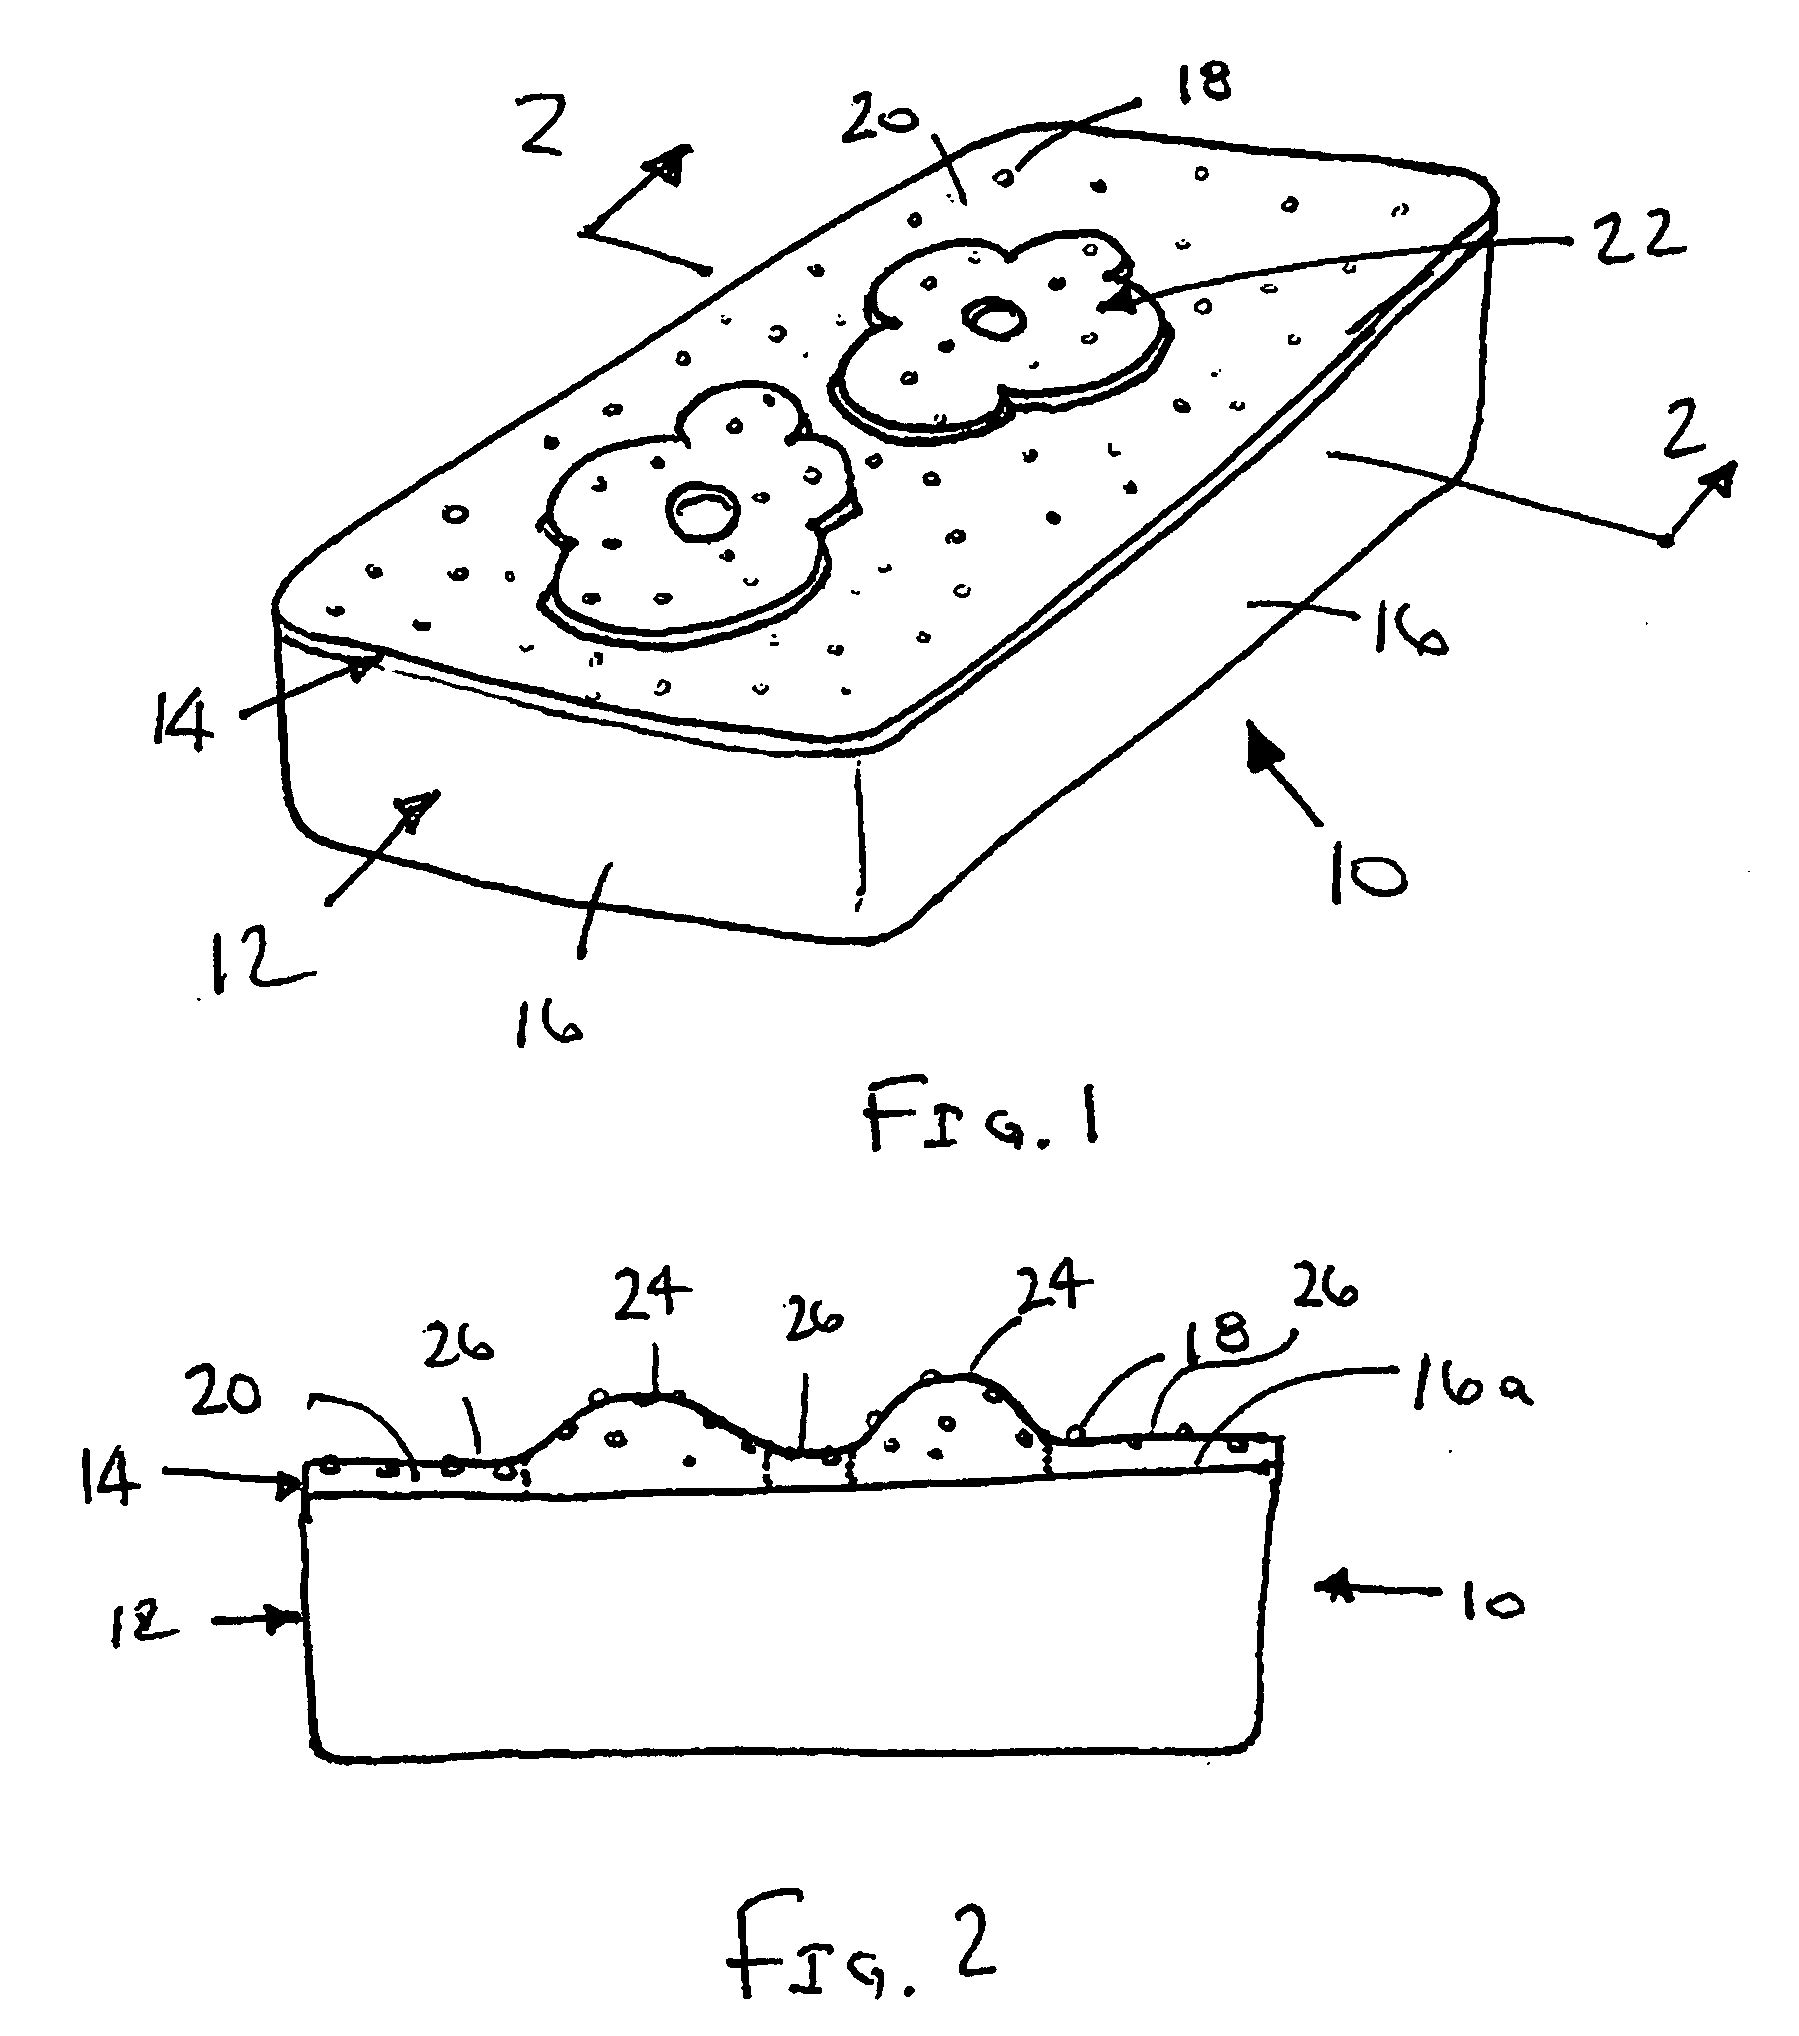 Abrasive articles and methods for making them